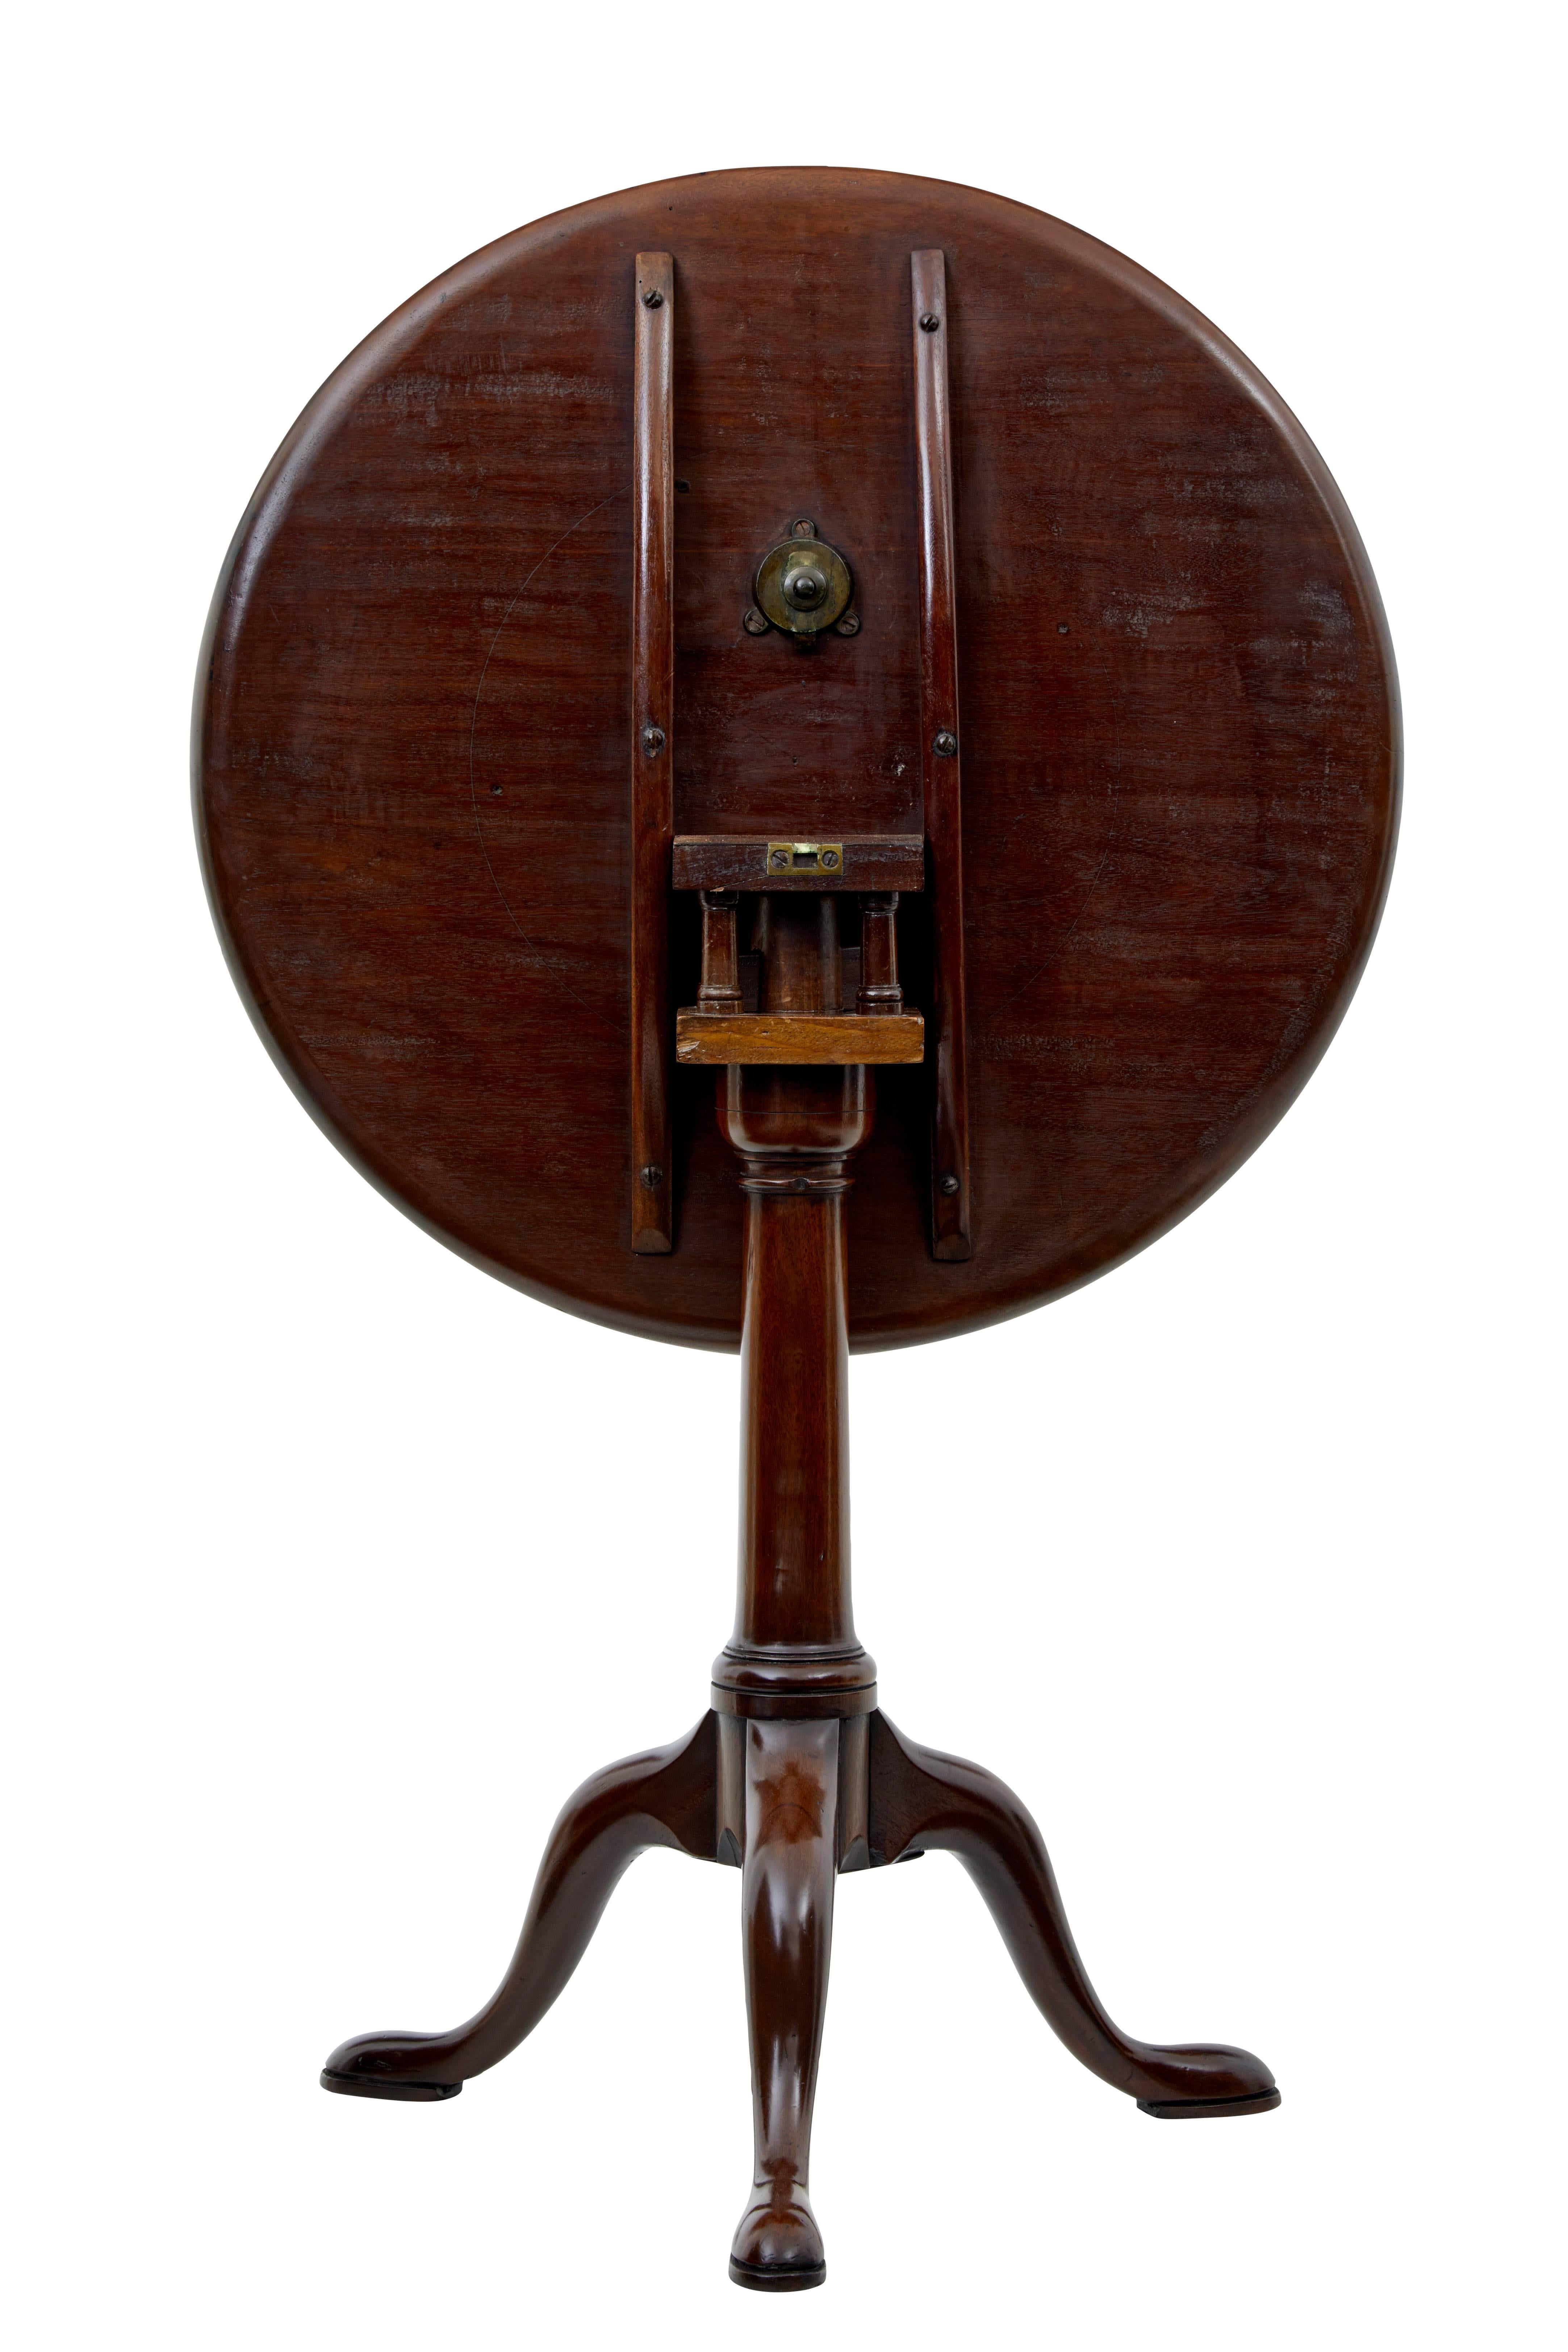 Good quality late Georgian mahogany tripod table circa 1800.
Circular dish top, standing on bird cage spindles, tapering stem, tripod legs and terminating on pad foot.
Tilt top.

Measures: Height 28 3/4